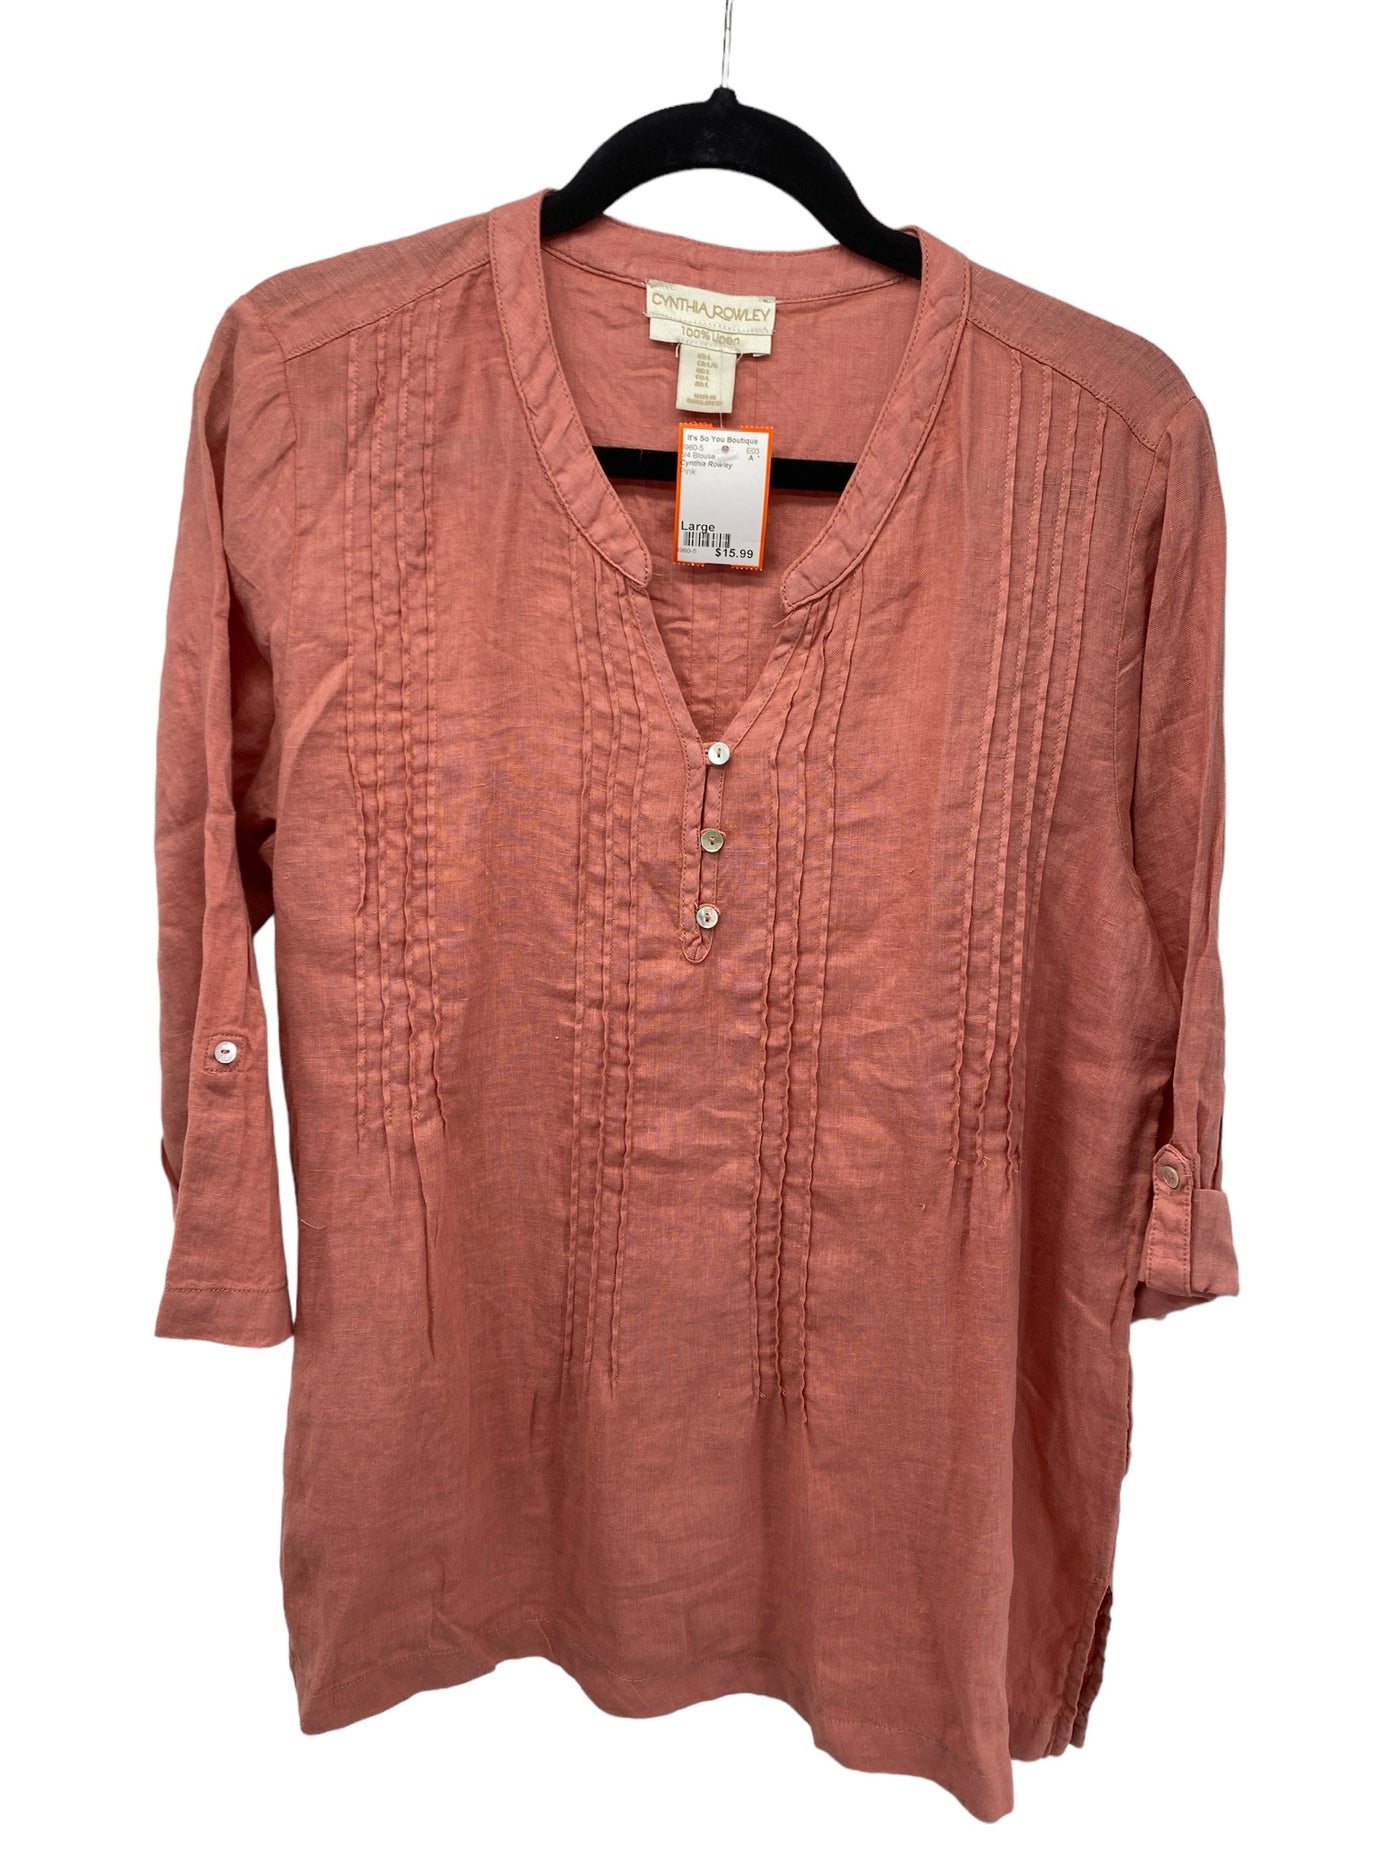 Cynthia Rowley Misses Size Large Pink 3/4 Blouse